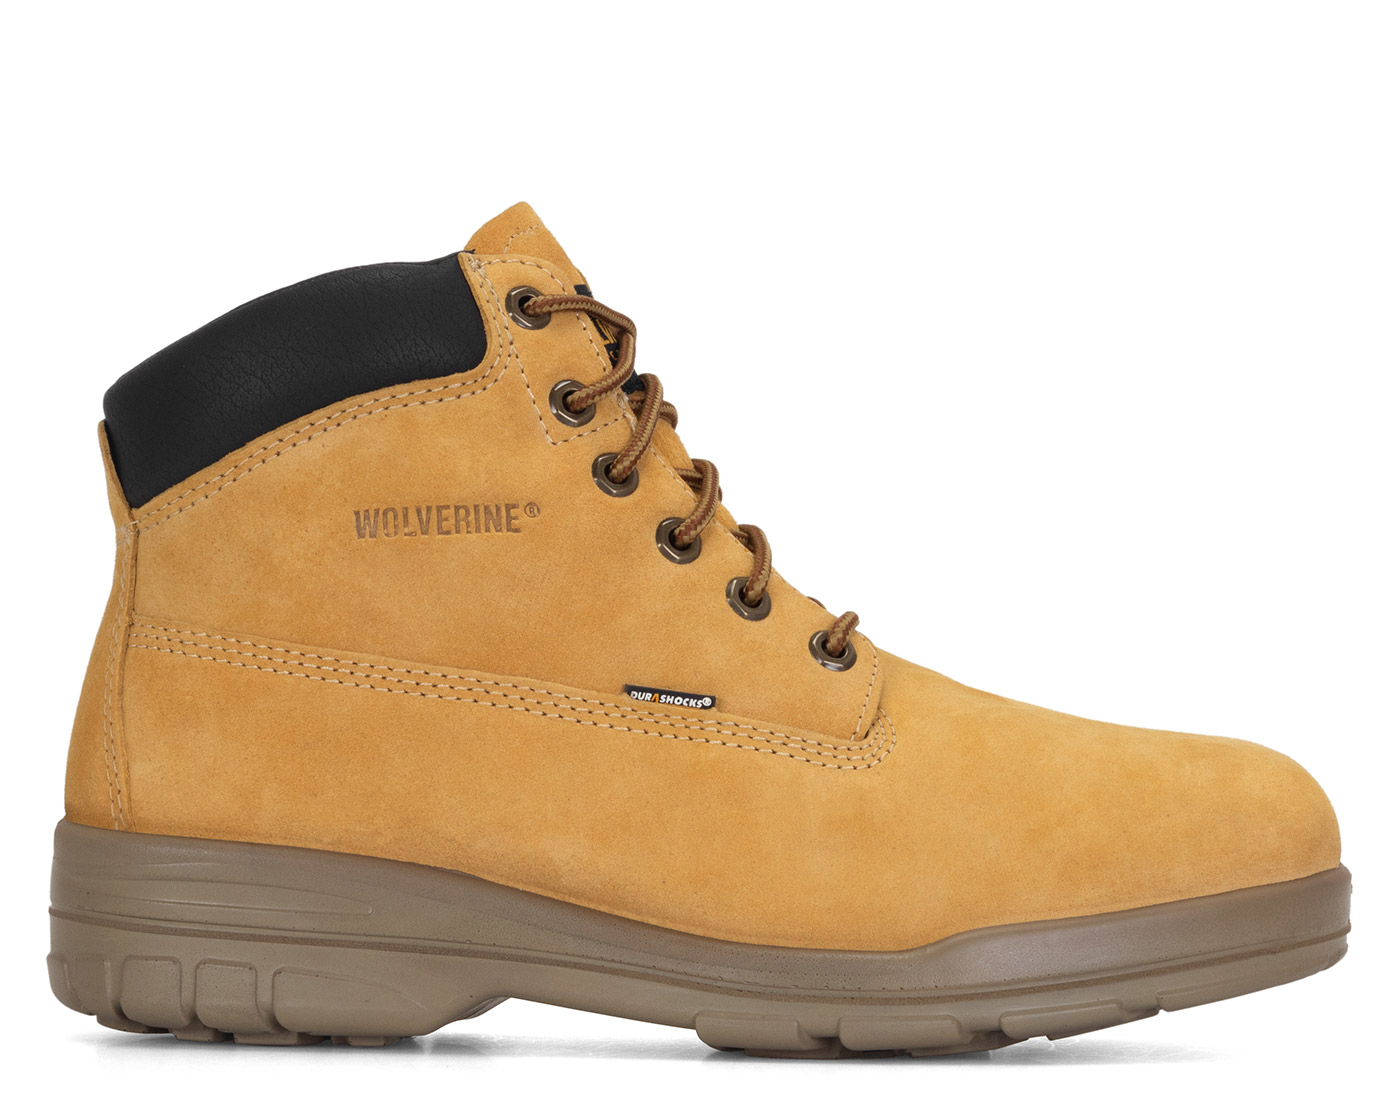 Wolverine Trappeur Waterproof Insulated 6" Boot